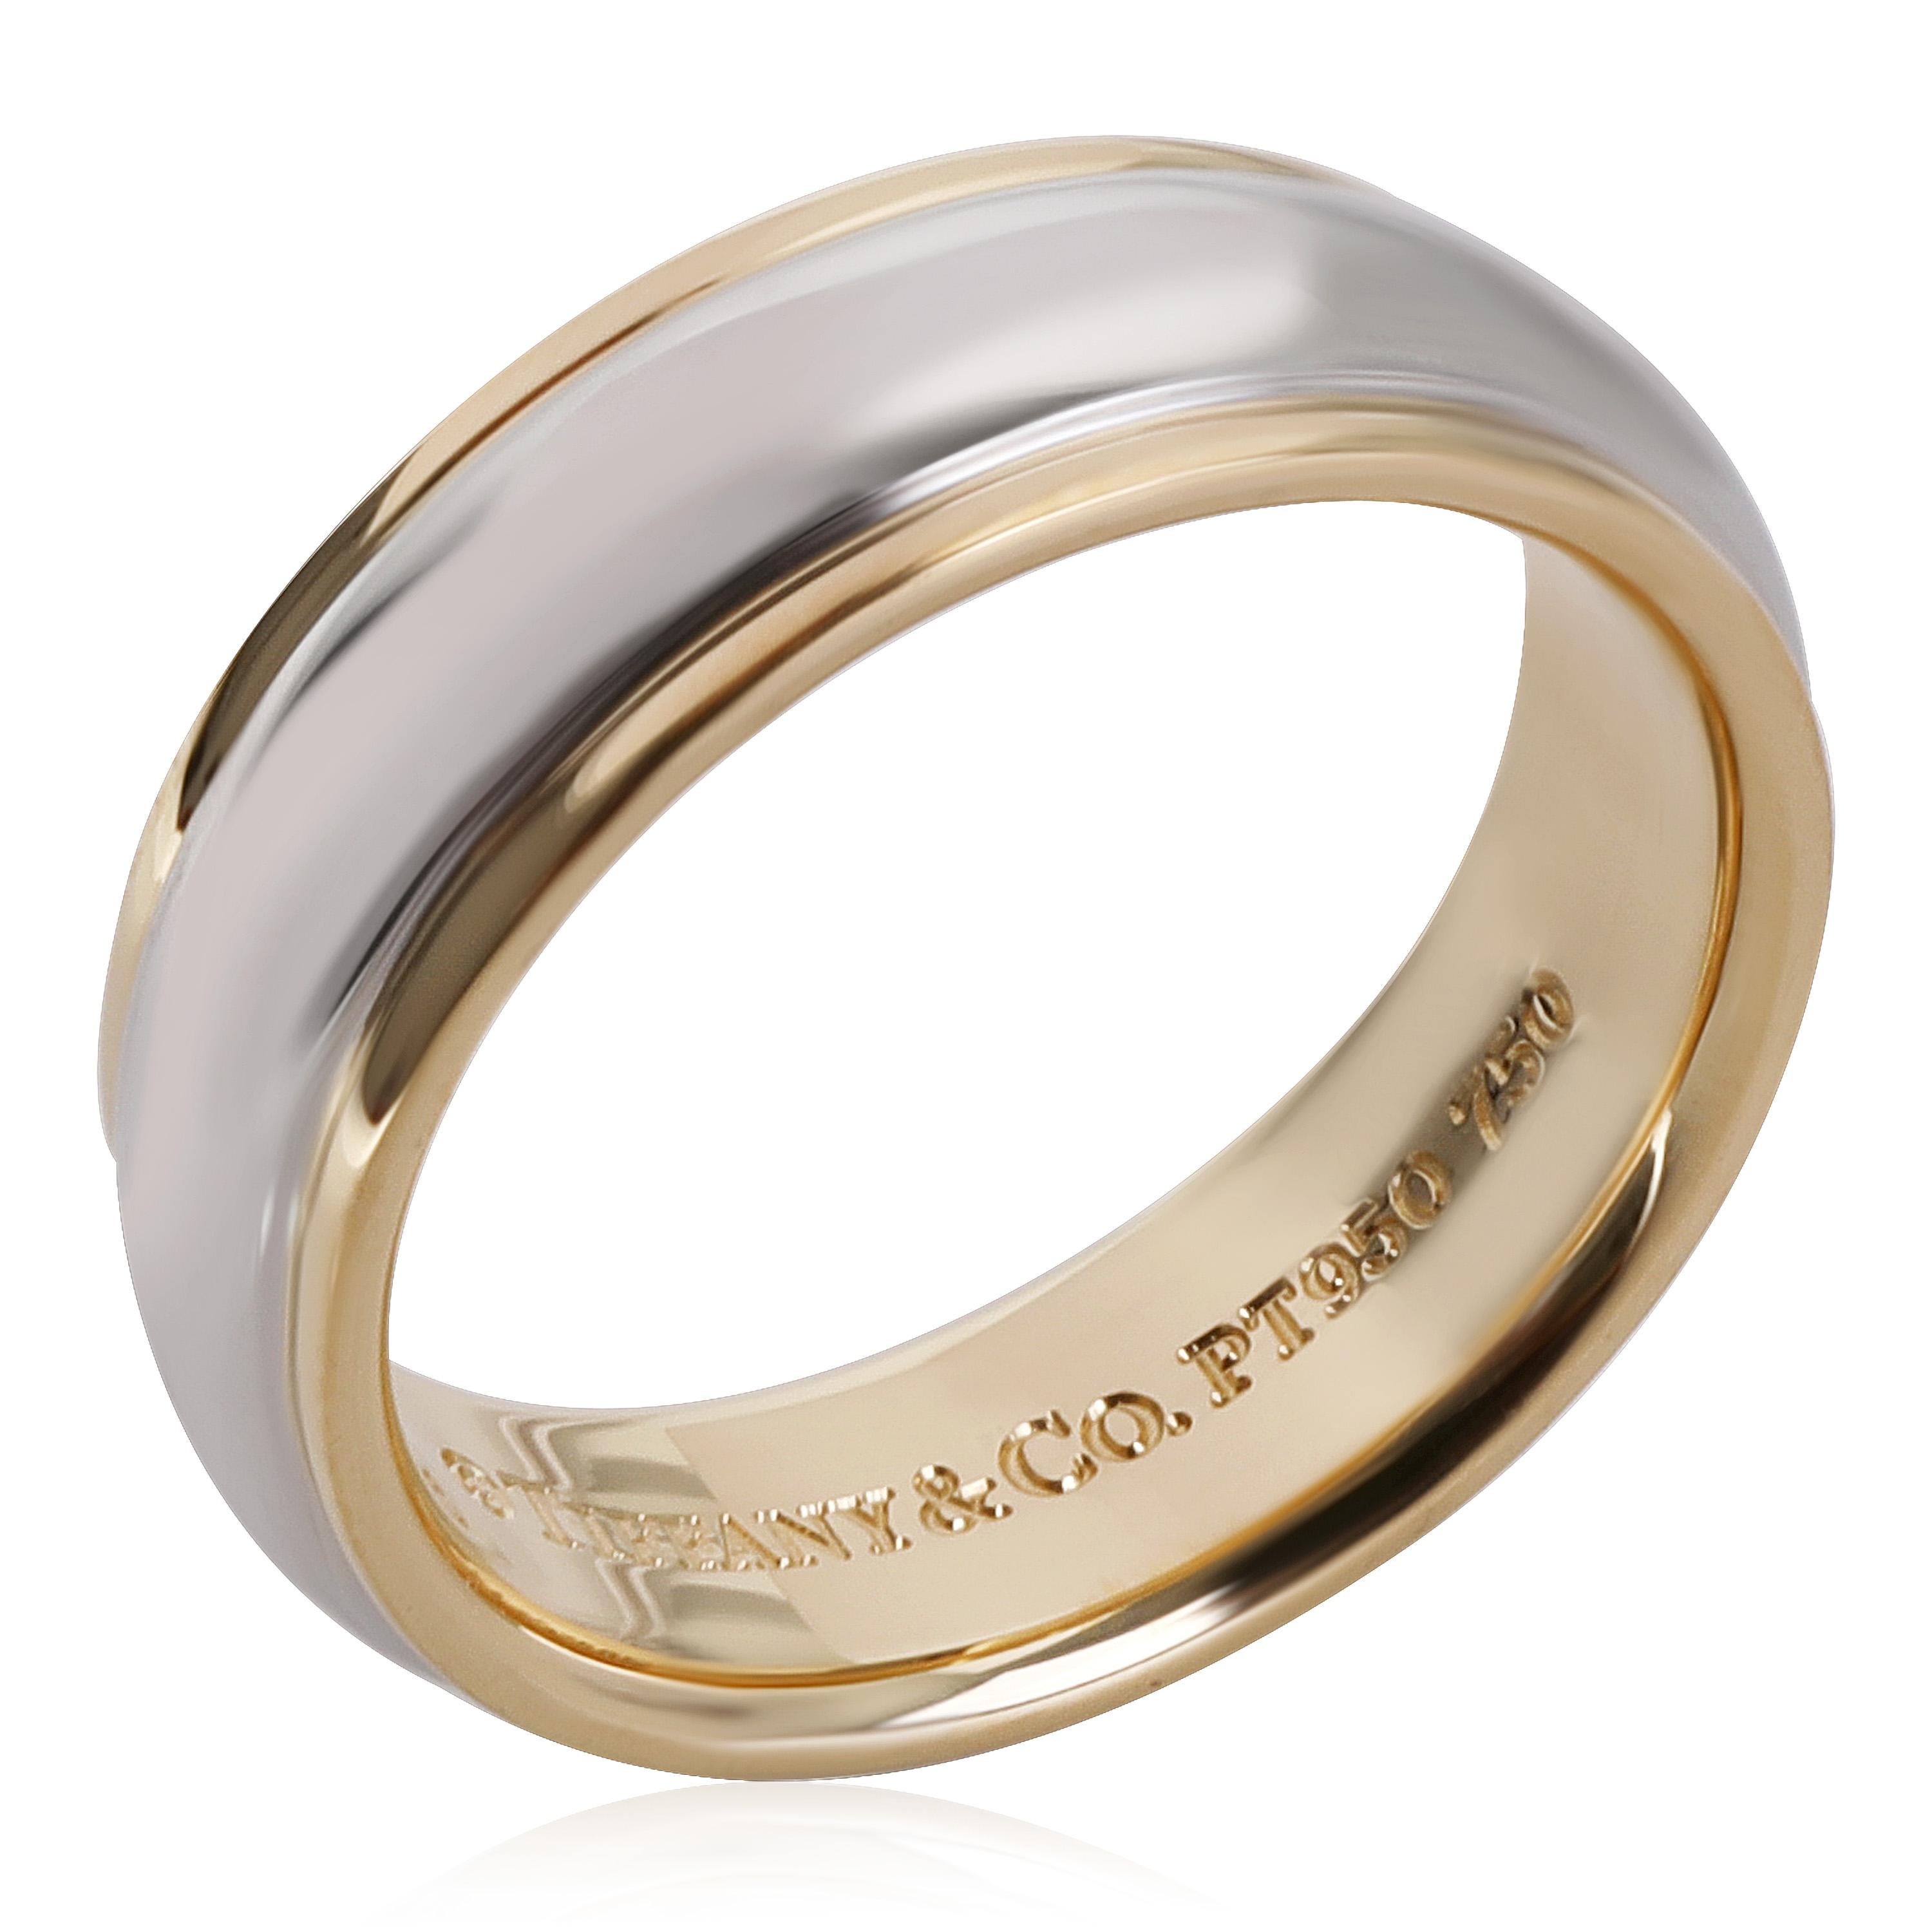 Tiffany & Co. Wedding Band in 18k Yellow Gold/Platinum

PRIMARY DETAILS
SKU: 118782
Listing Title: Tiffany & Co. Wedding Band in 18k Yellow Gold/Platinum
Condition Description: Retails for 2300 USD. In excellent condition and recently polished. Ring